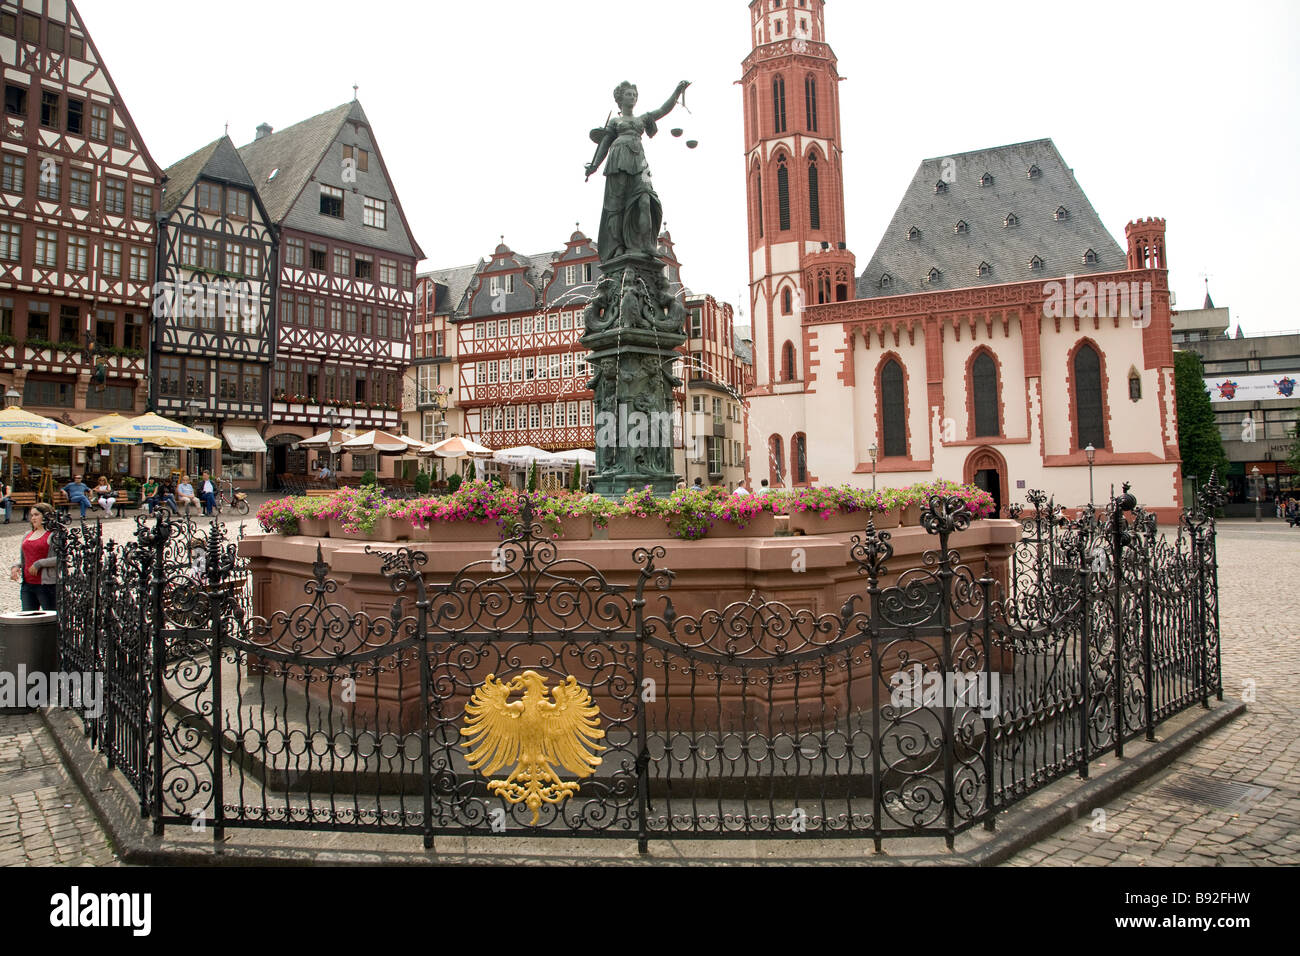 Historic buildings in the Romerberg district that were reconstructed according to the original plans Frankfurt am Main Germany Stock Photo